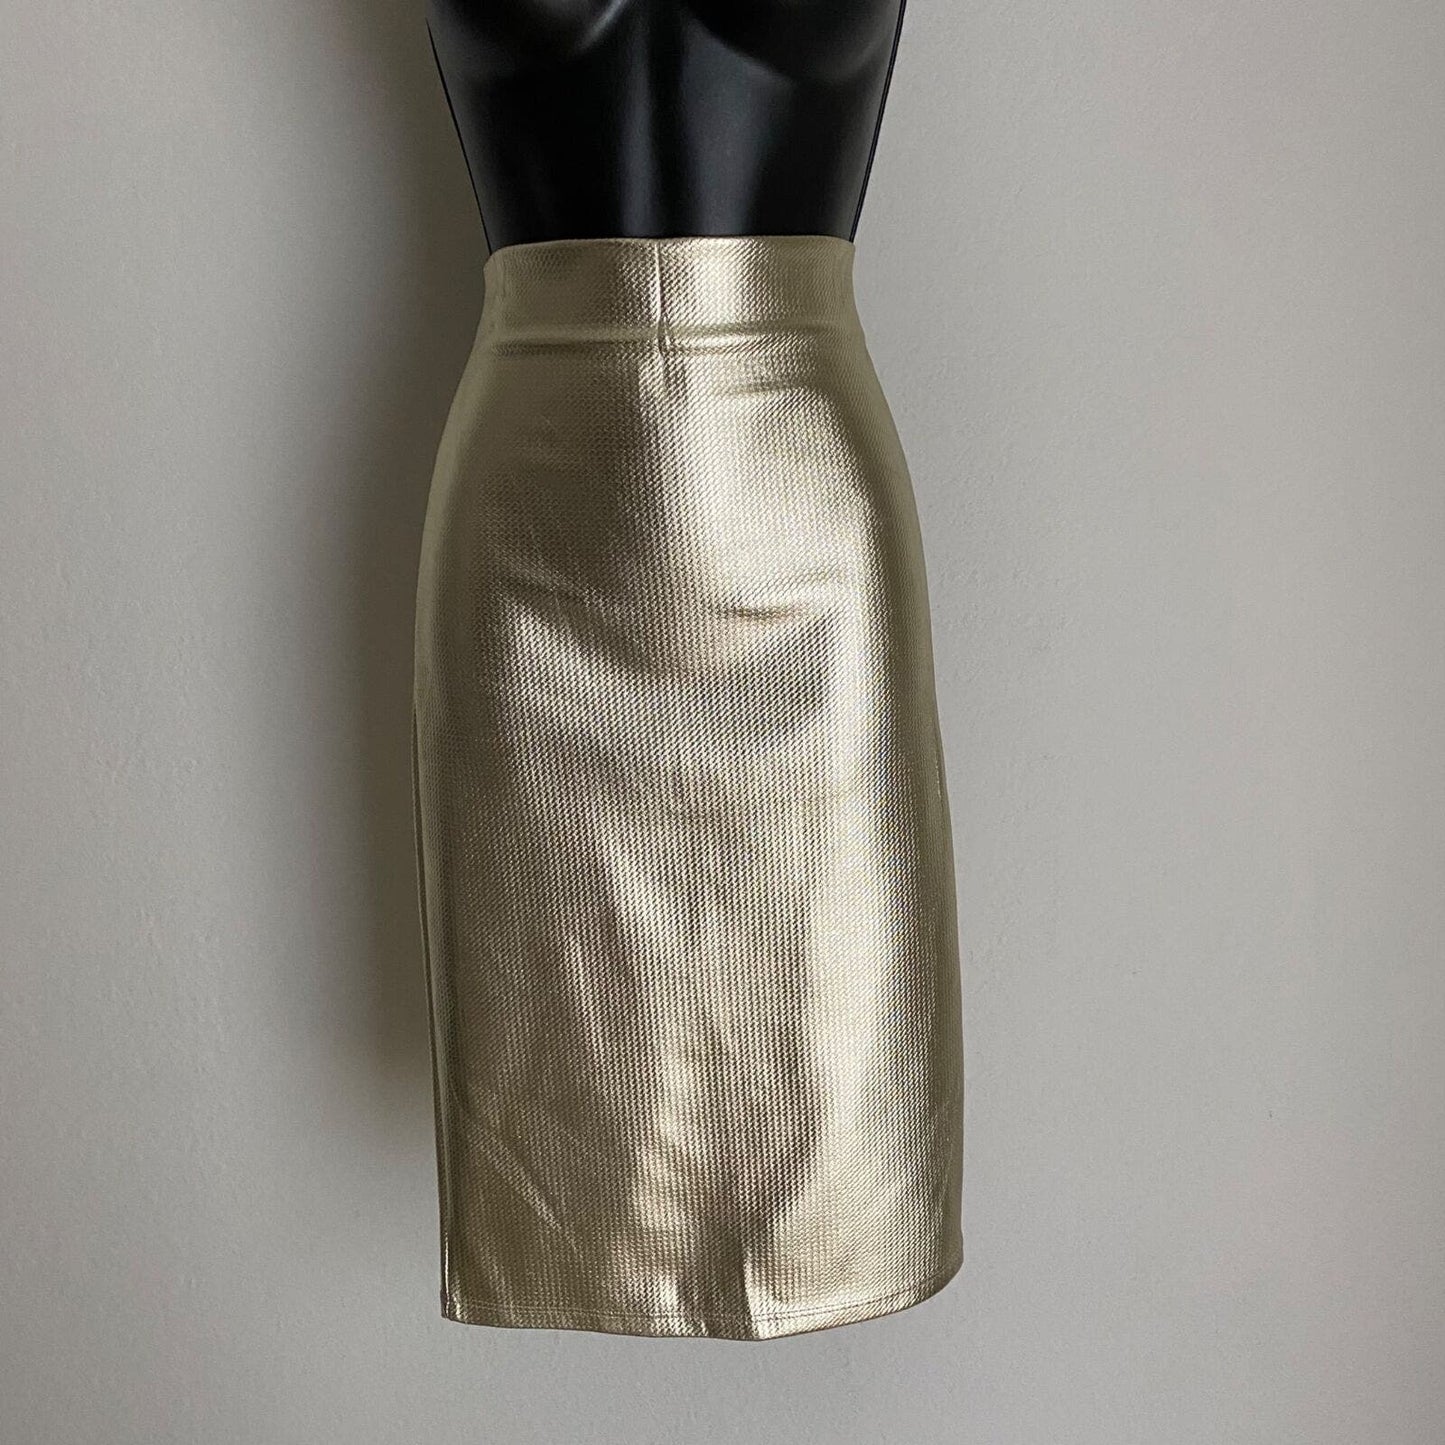 Contraversee Clothing sz M High waisted metallic fitted midi skirt